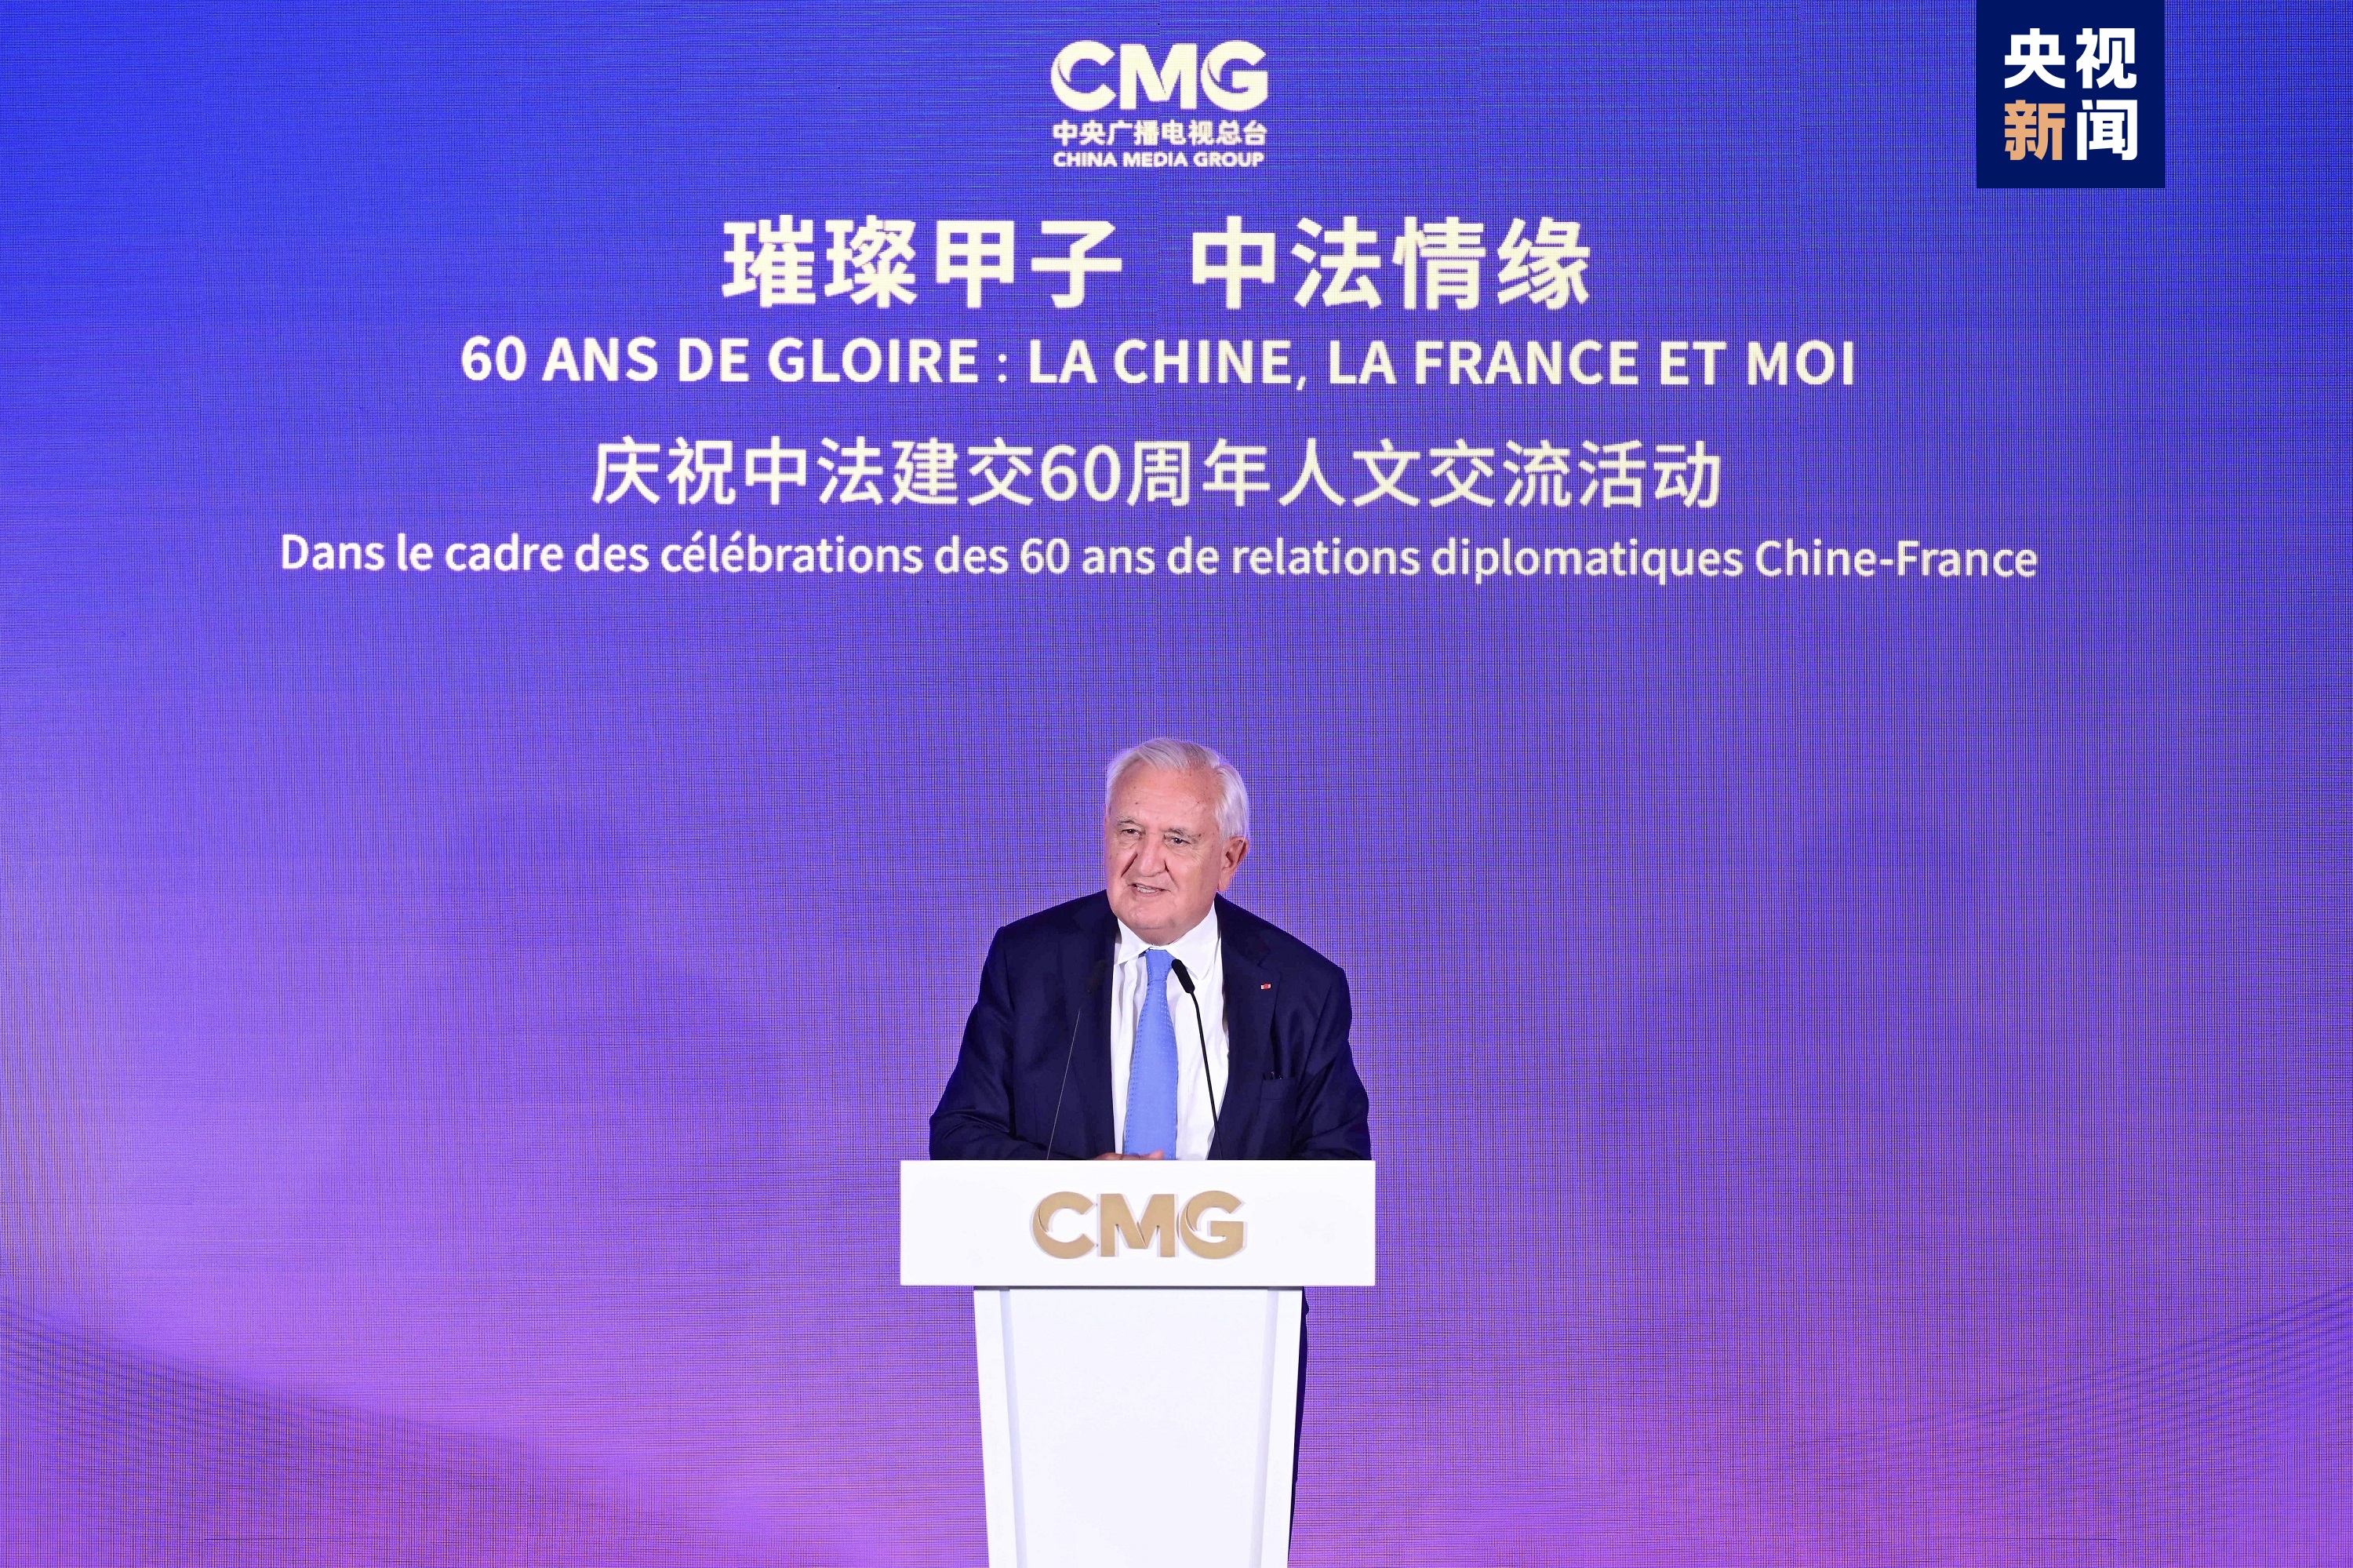 Jean-Pierre Raffarin, president of the Prospective and Innovation Foundation and former French prime minister speaks during the event, Paris, France, May 6, 2024. /CMG